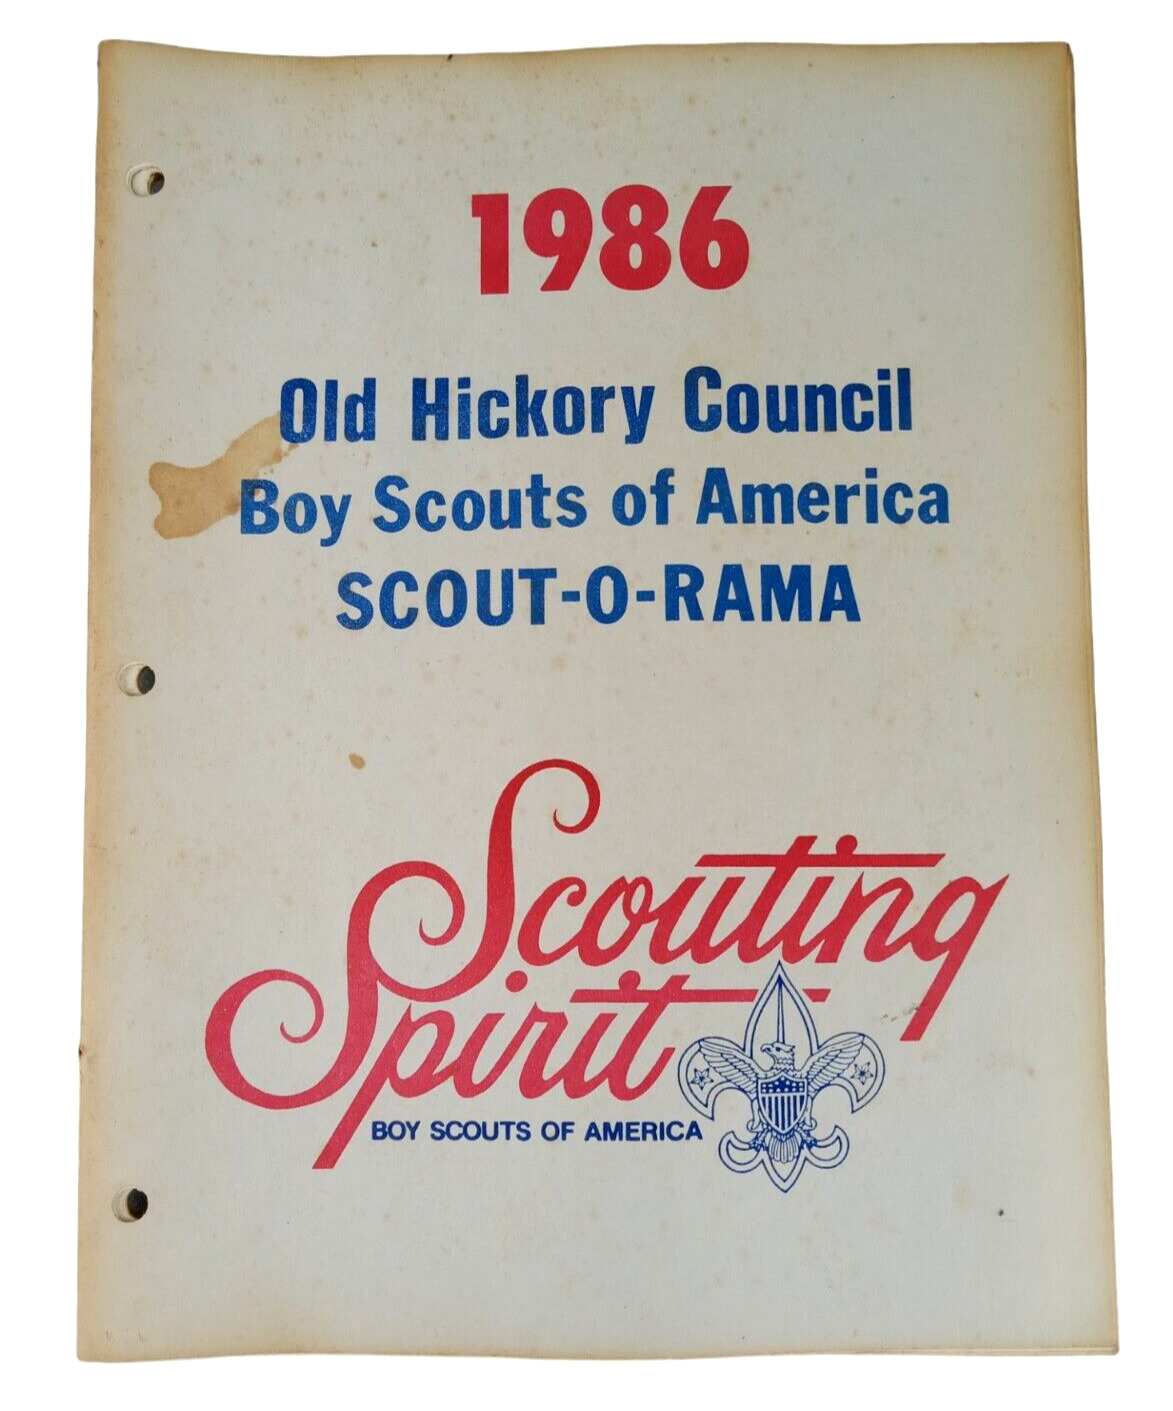 BSA Boy Scouts Collectible 1986 Old Hickory Council Scout-O-Rama Book Booklet